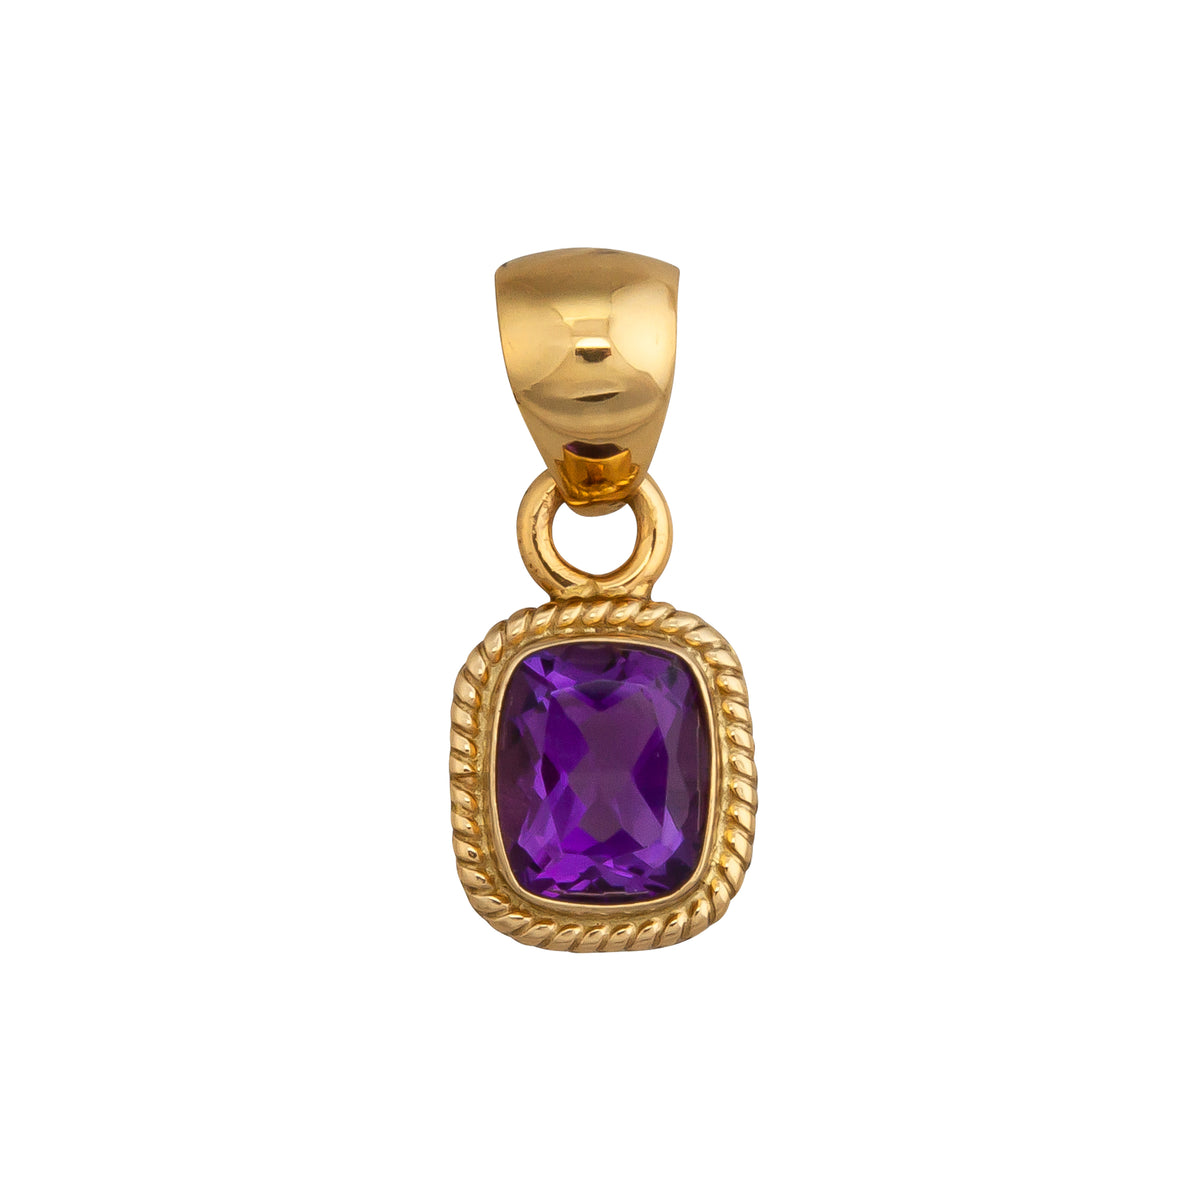 Charles Albert Jewelry - Alchemia Amethyst Rope Pendant - Front View